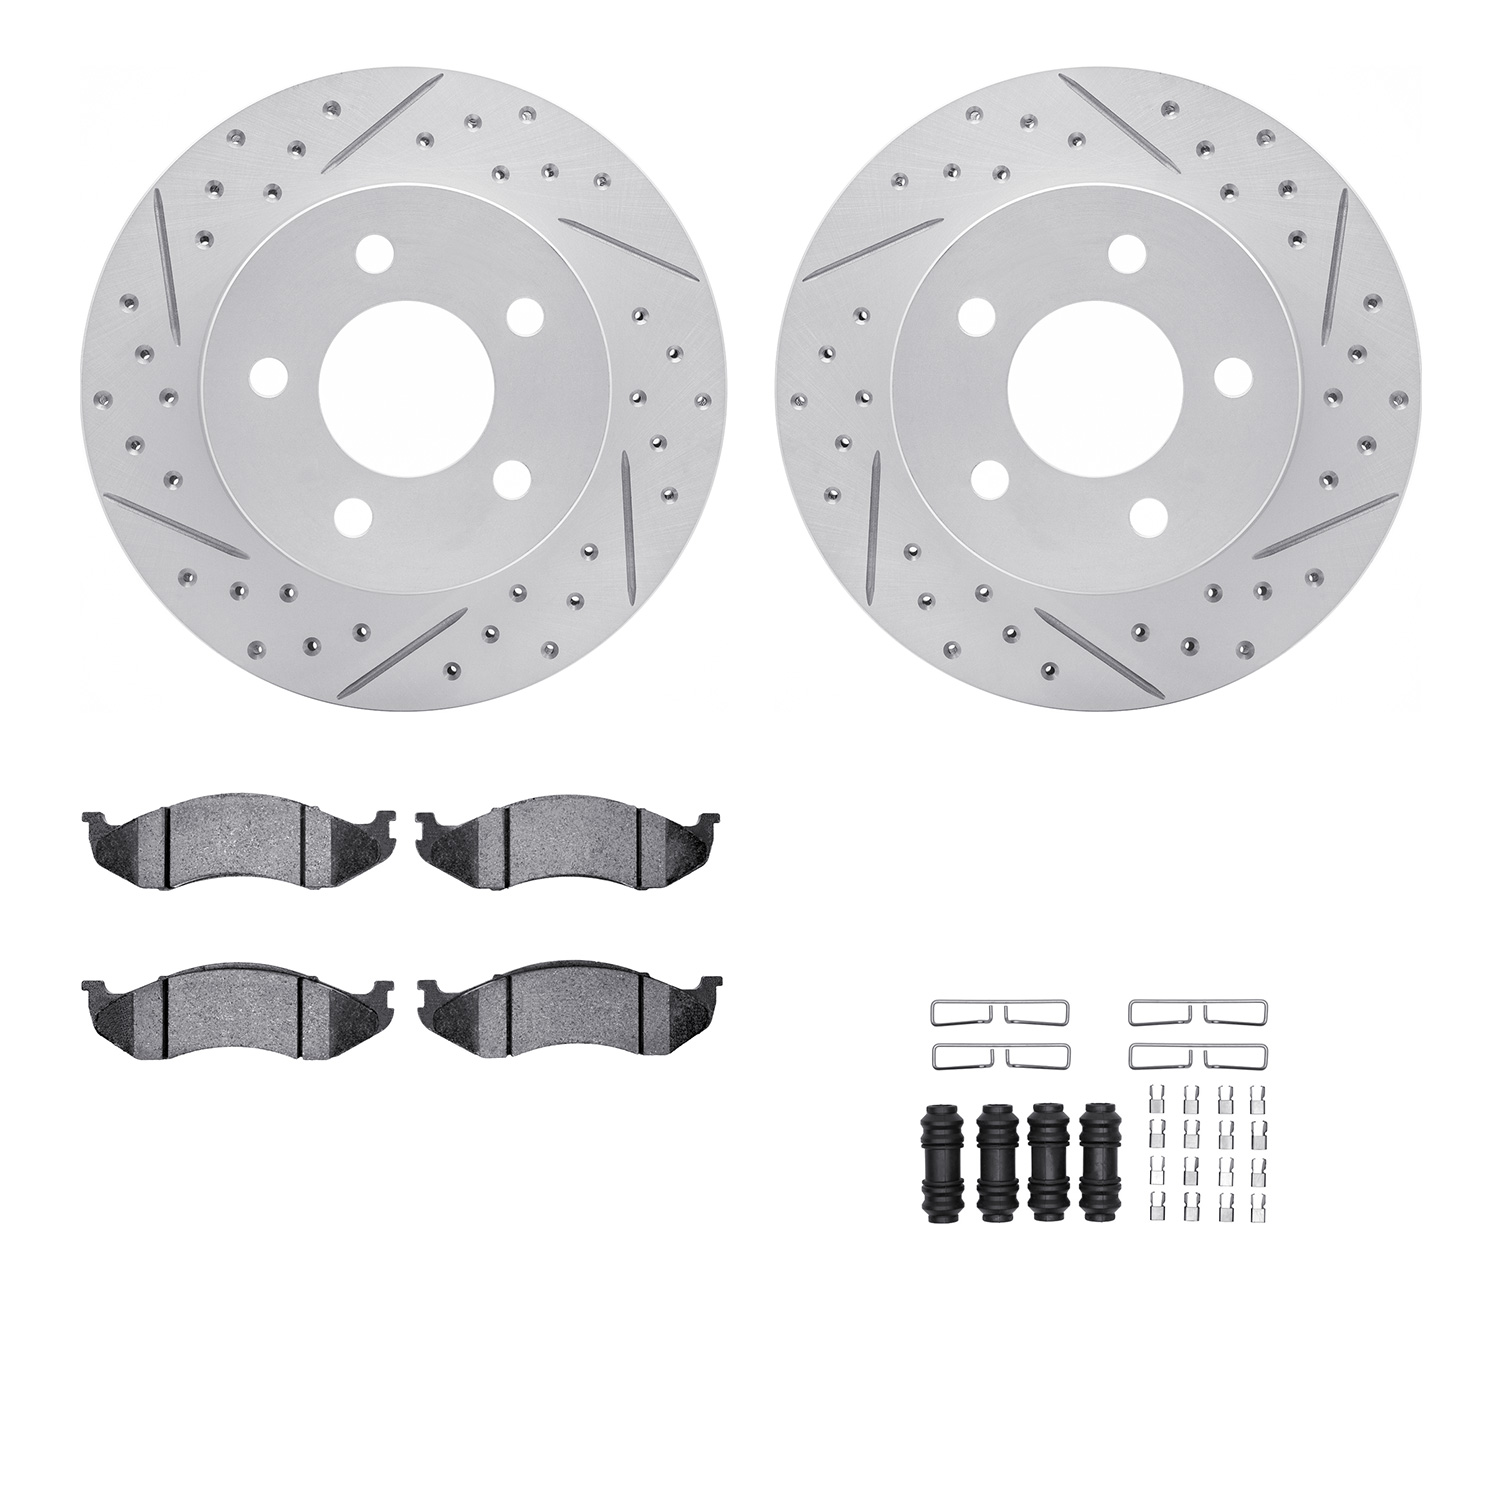 2212-42032 Geoperformance Drilled/Slotted Rotors w/Heavy-Duty Pads Kit & Hardware, 1990-1999 Mopar, Position: Front